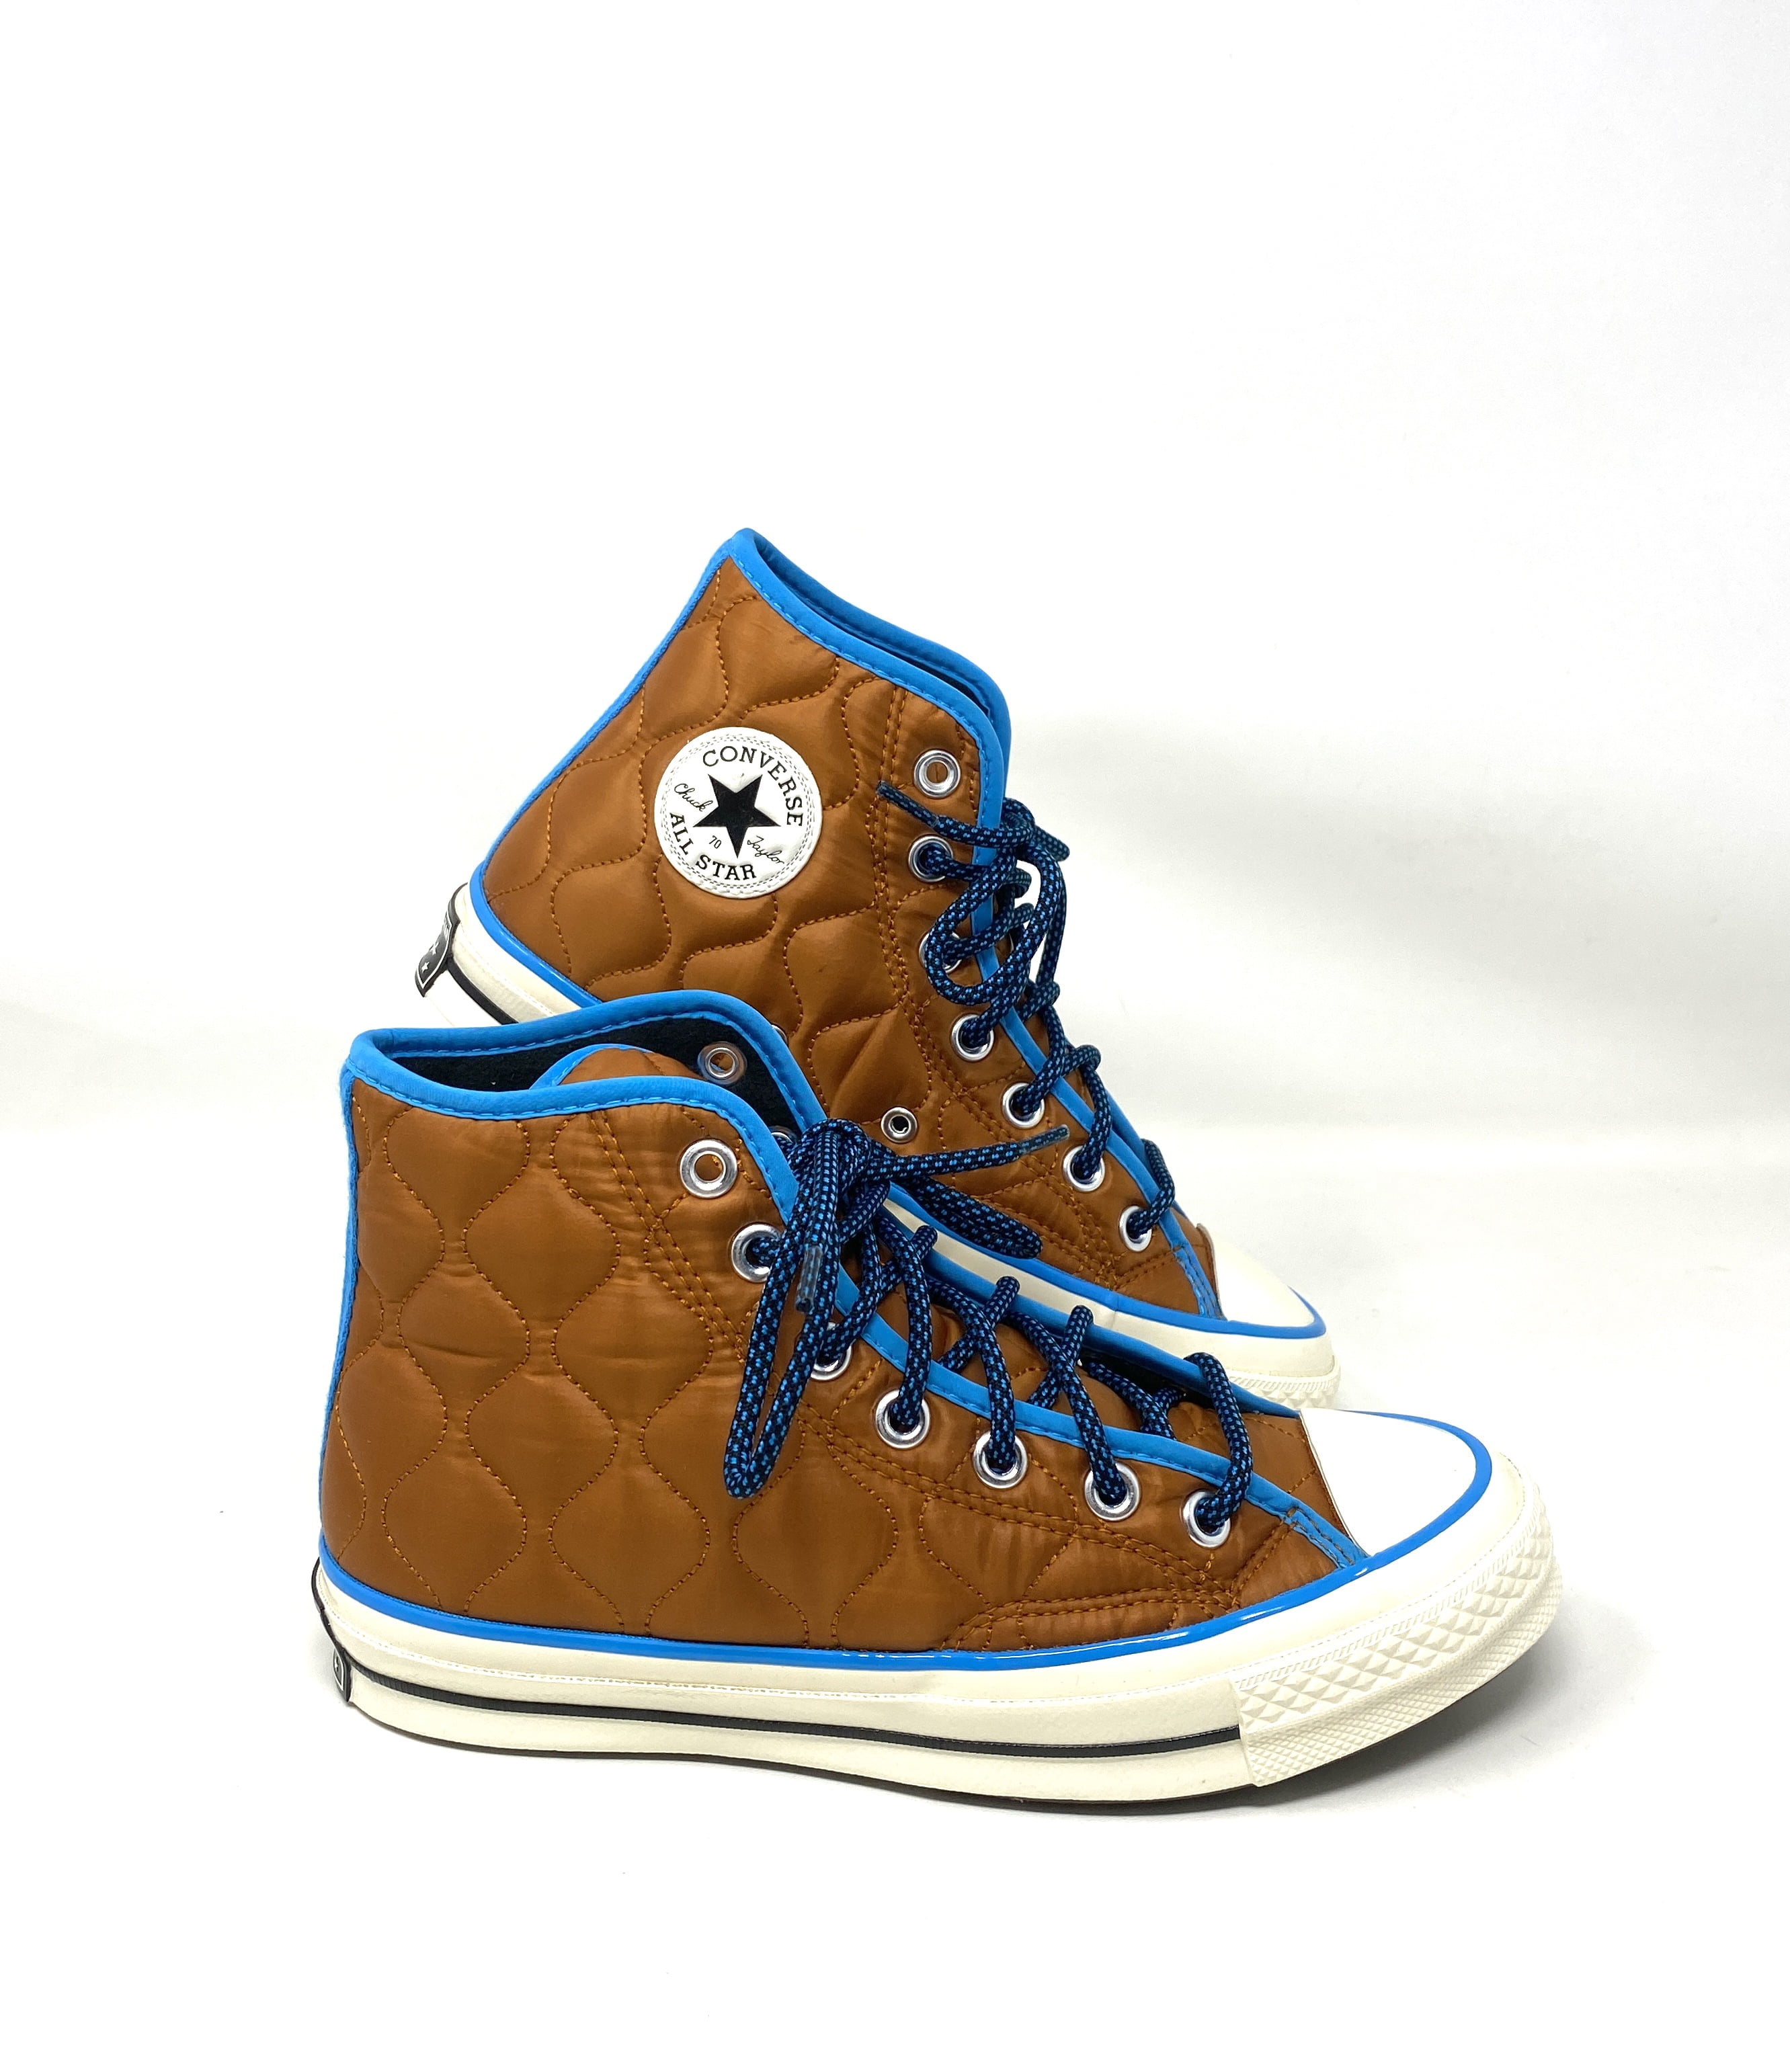 Converse Chuck 70 HI Amber Brown Blue High Top Shoes Women's Size Sneakers  169374C 